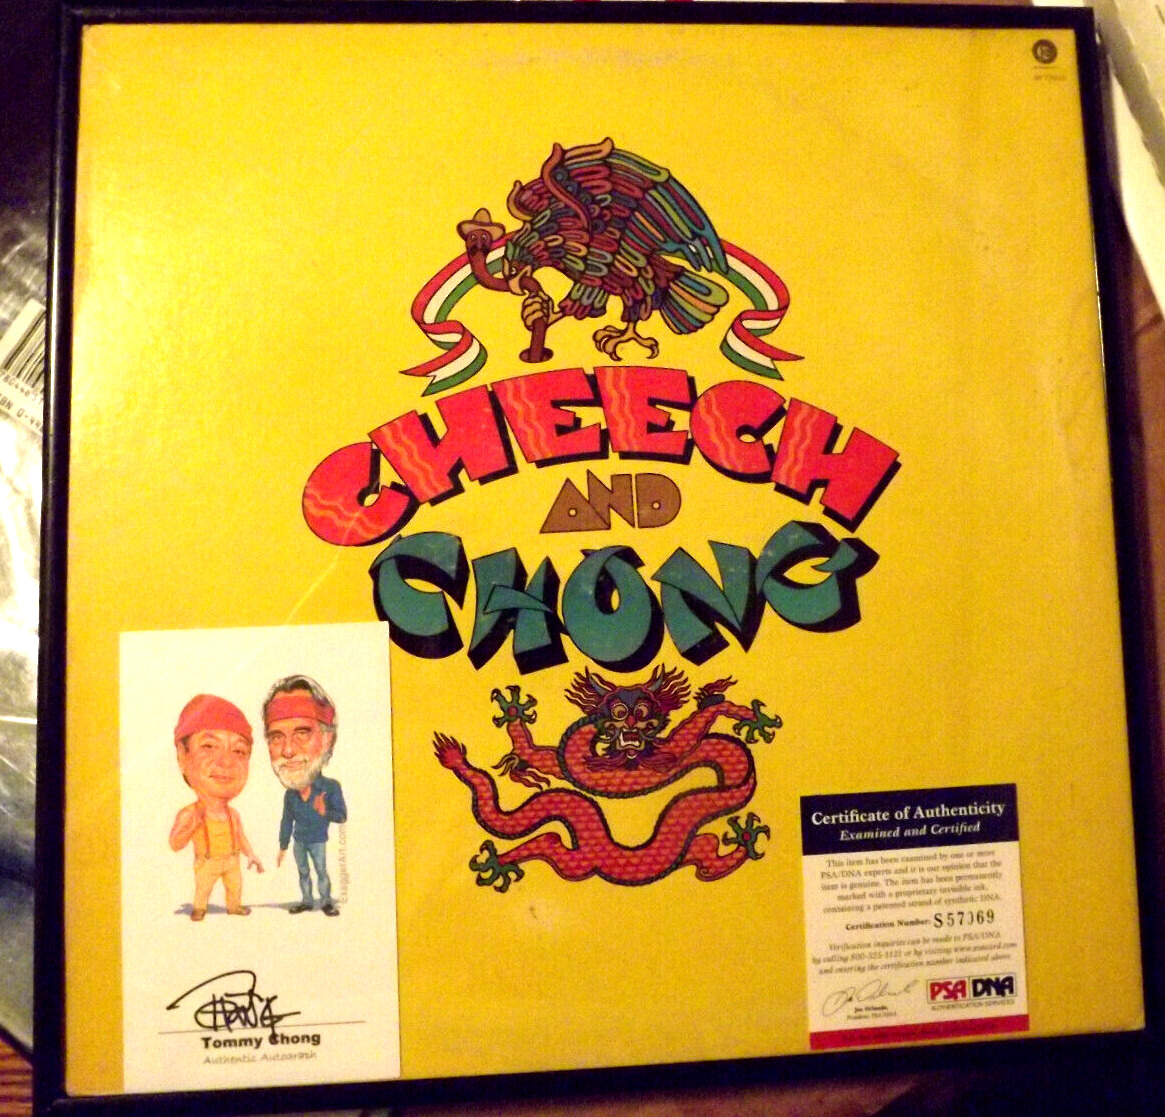 Cheech and Chong Self Titled Vinyl Album ( 1971 ) Tommy Chong Signed Card W/PSA